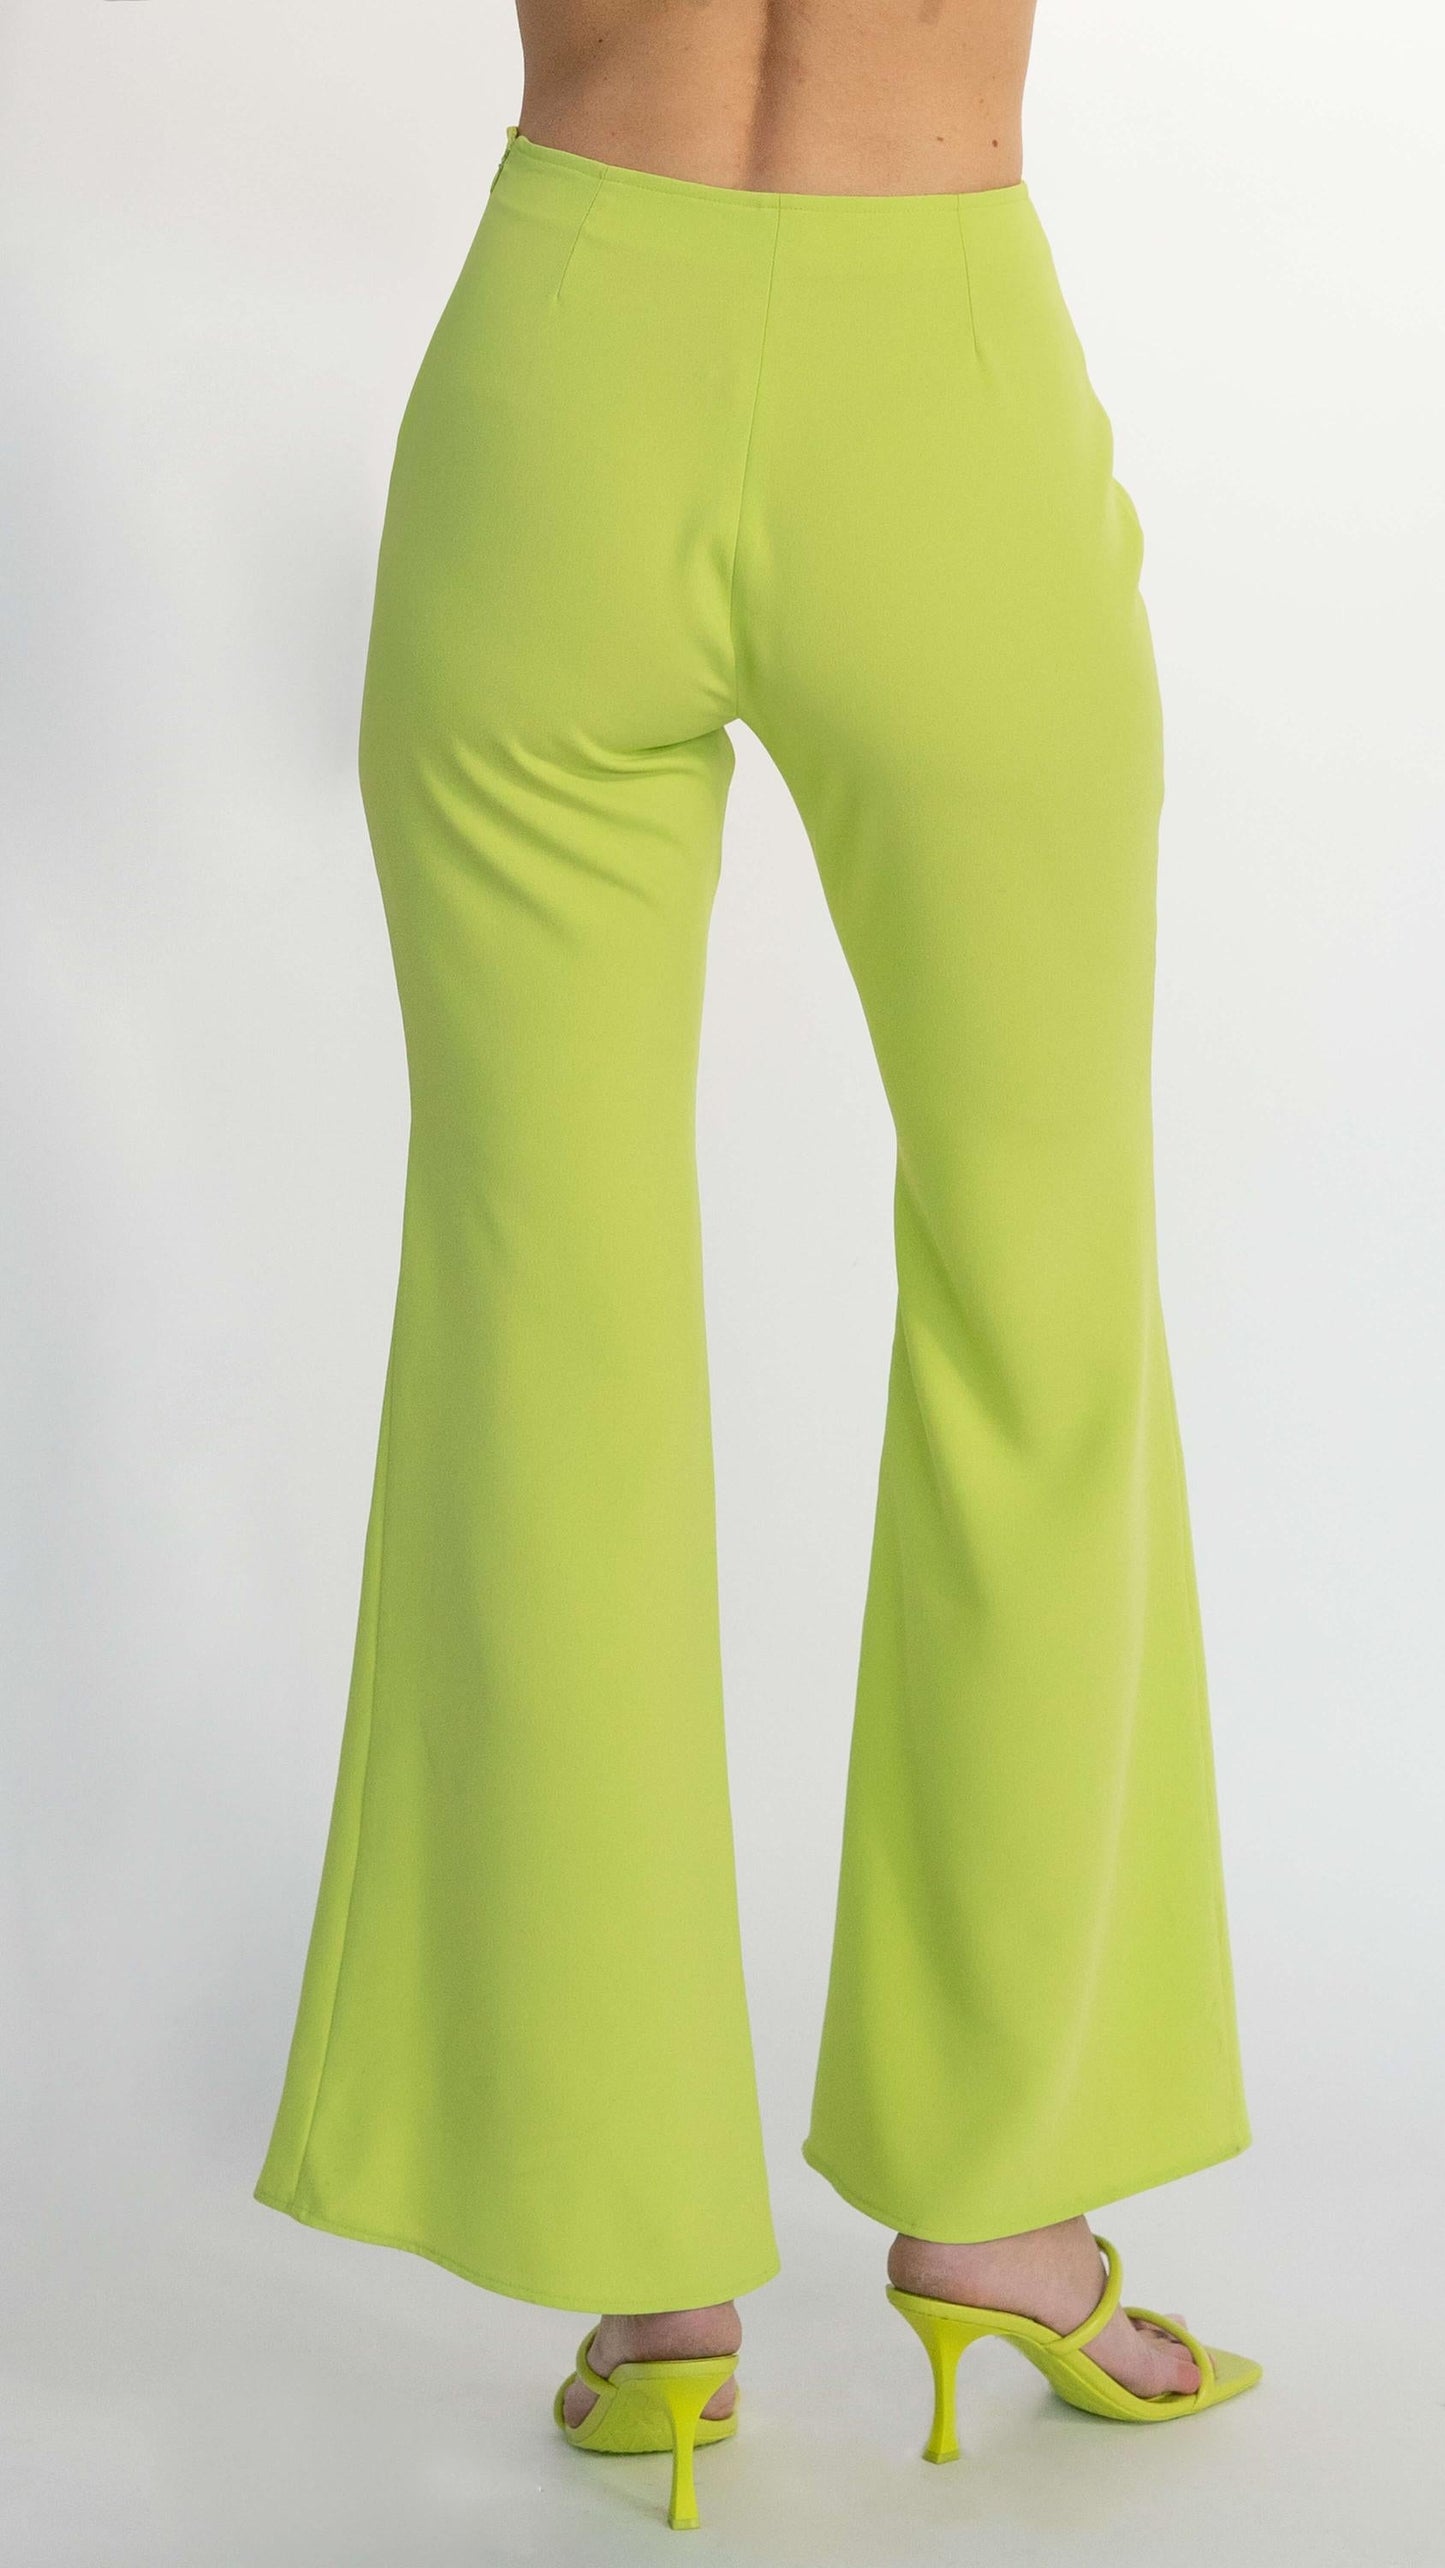 Flared lime pants